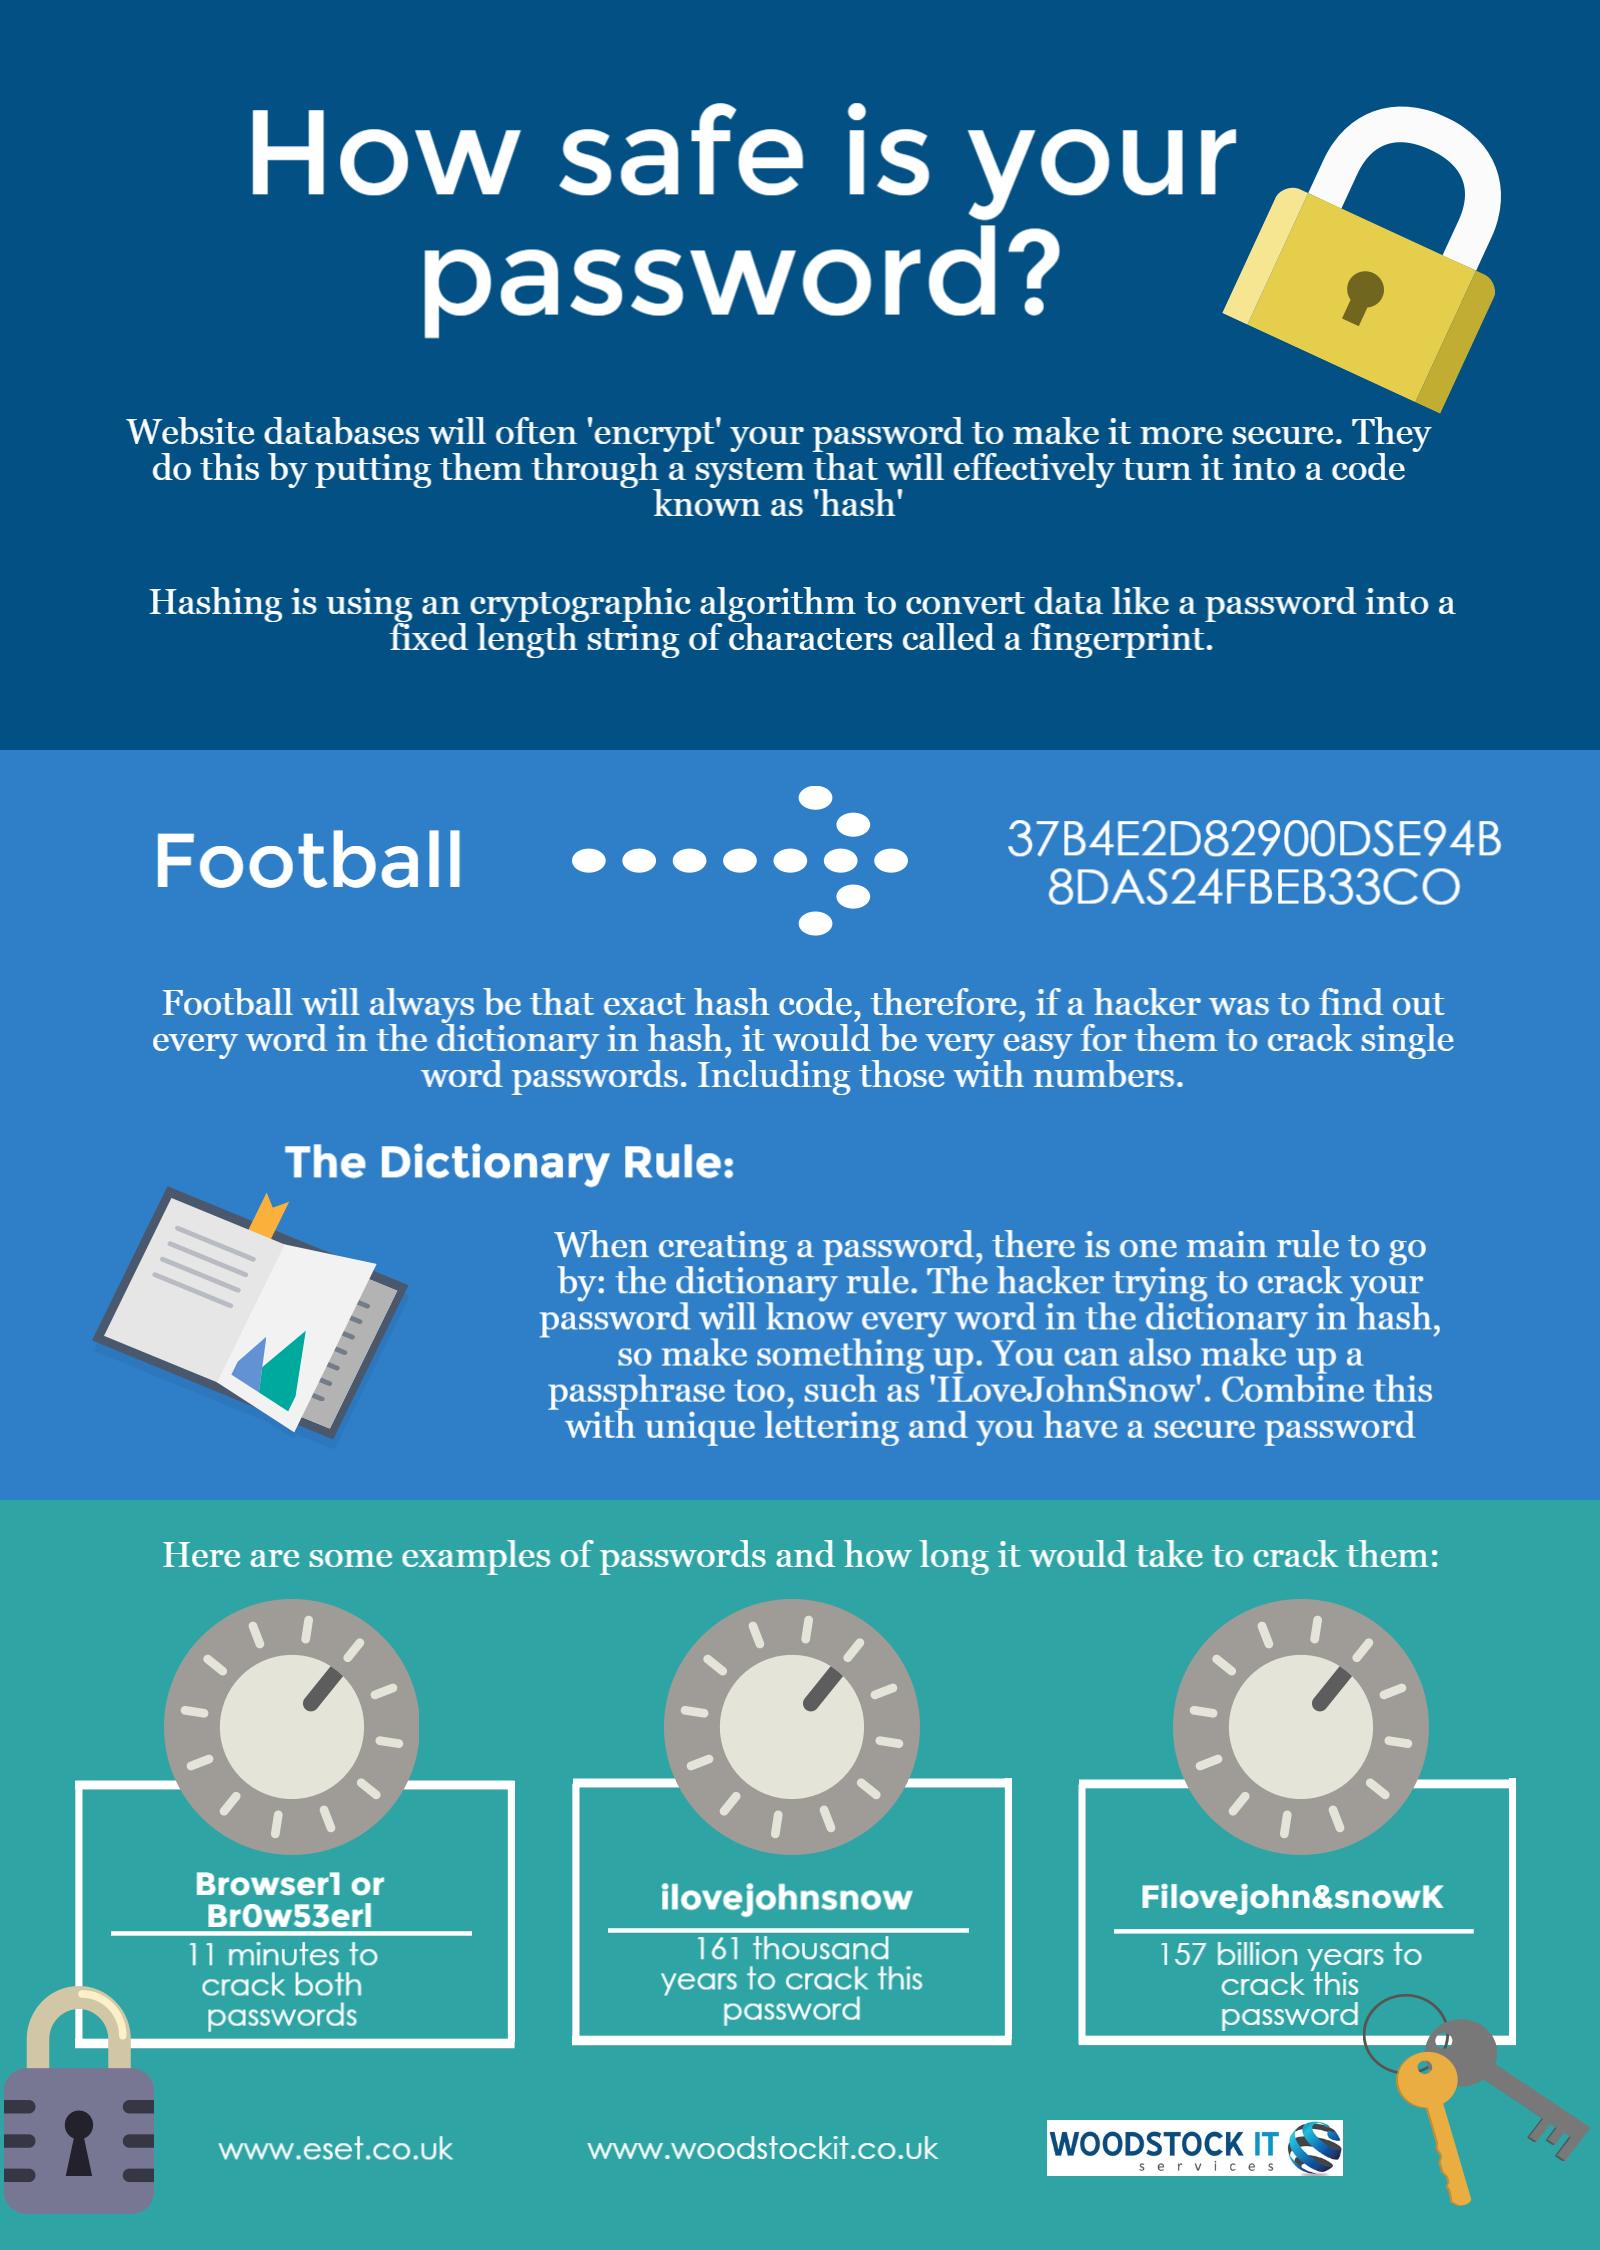 How safe is your password infographic